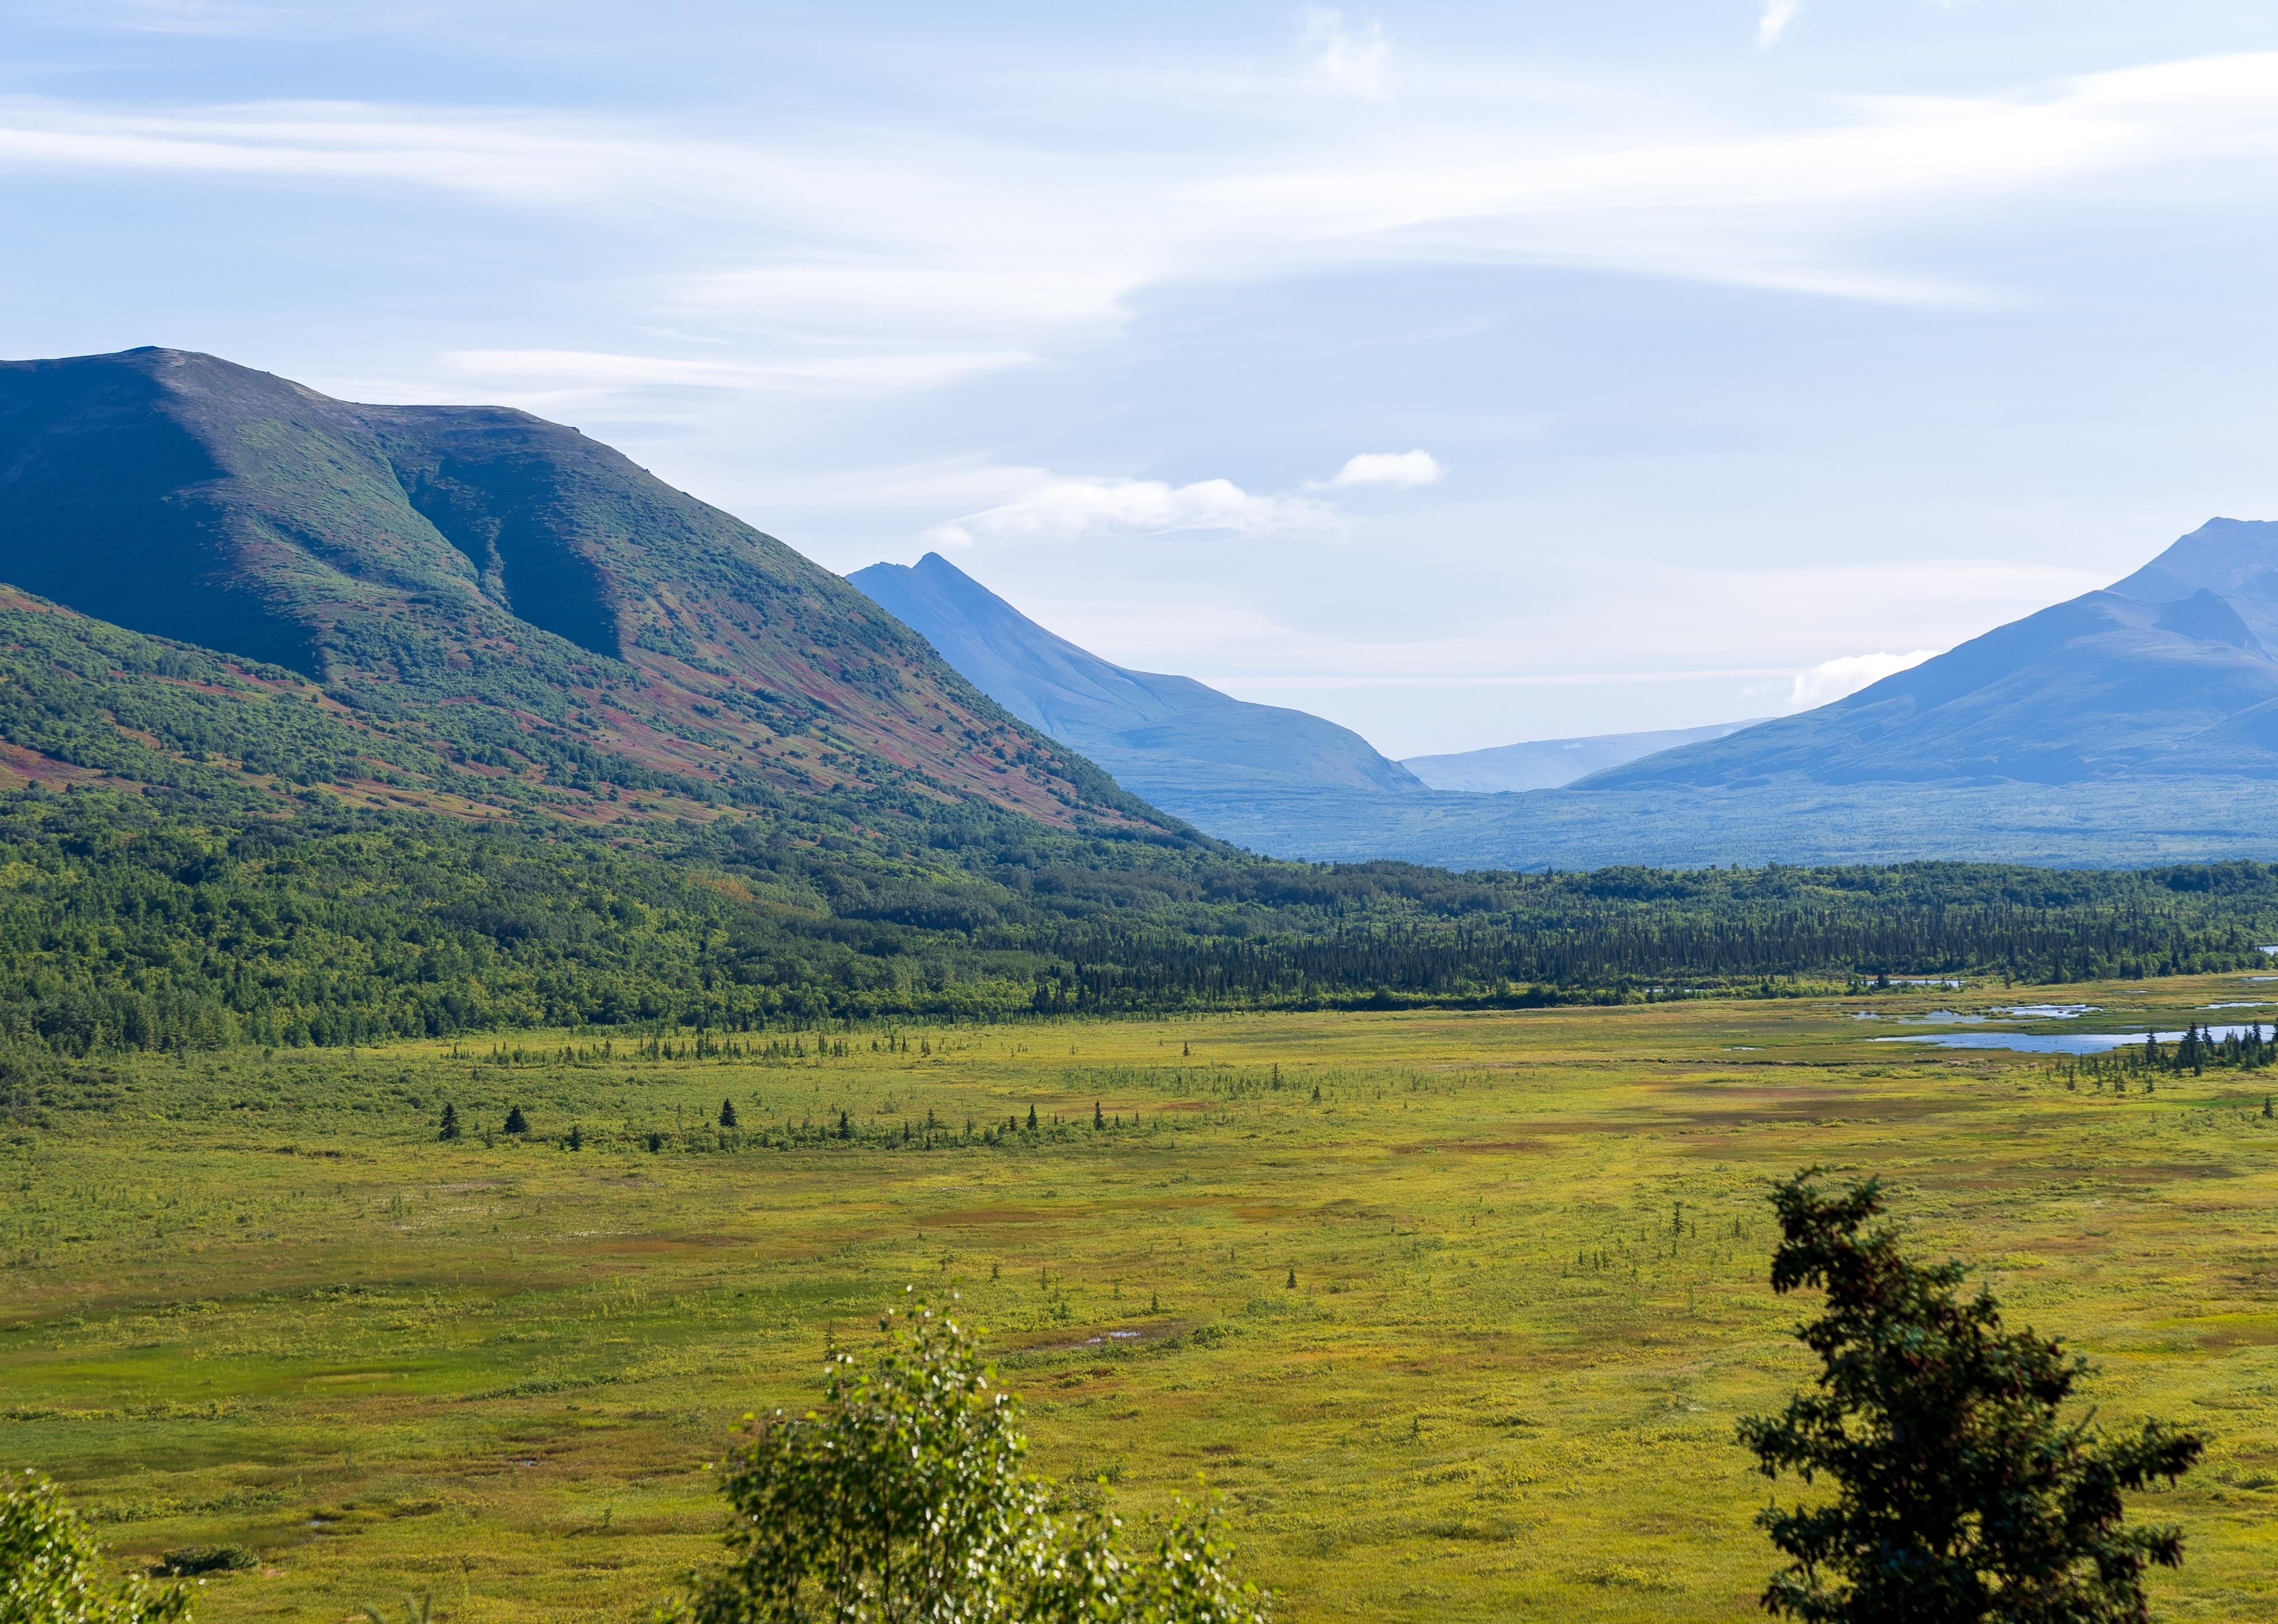 A natural view of the vast landscape in the Katmai National Park in Alaska.